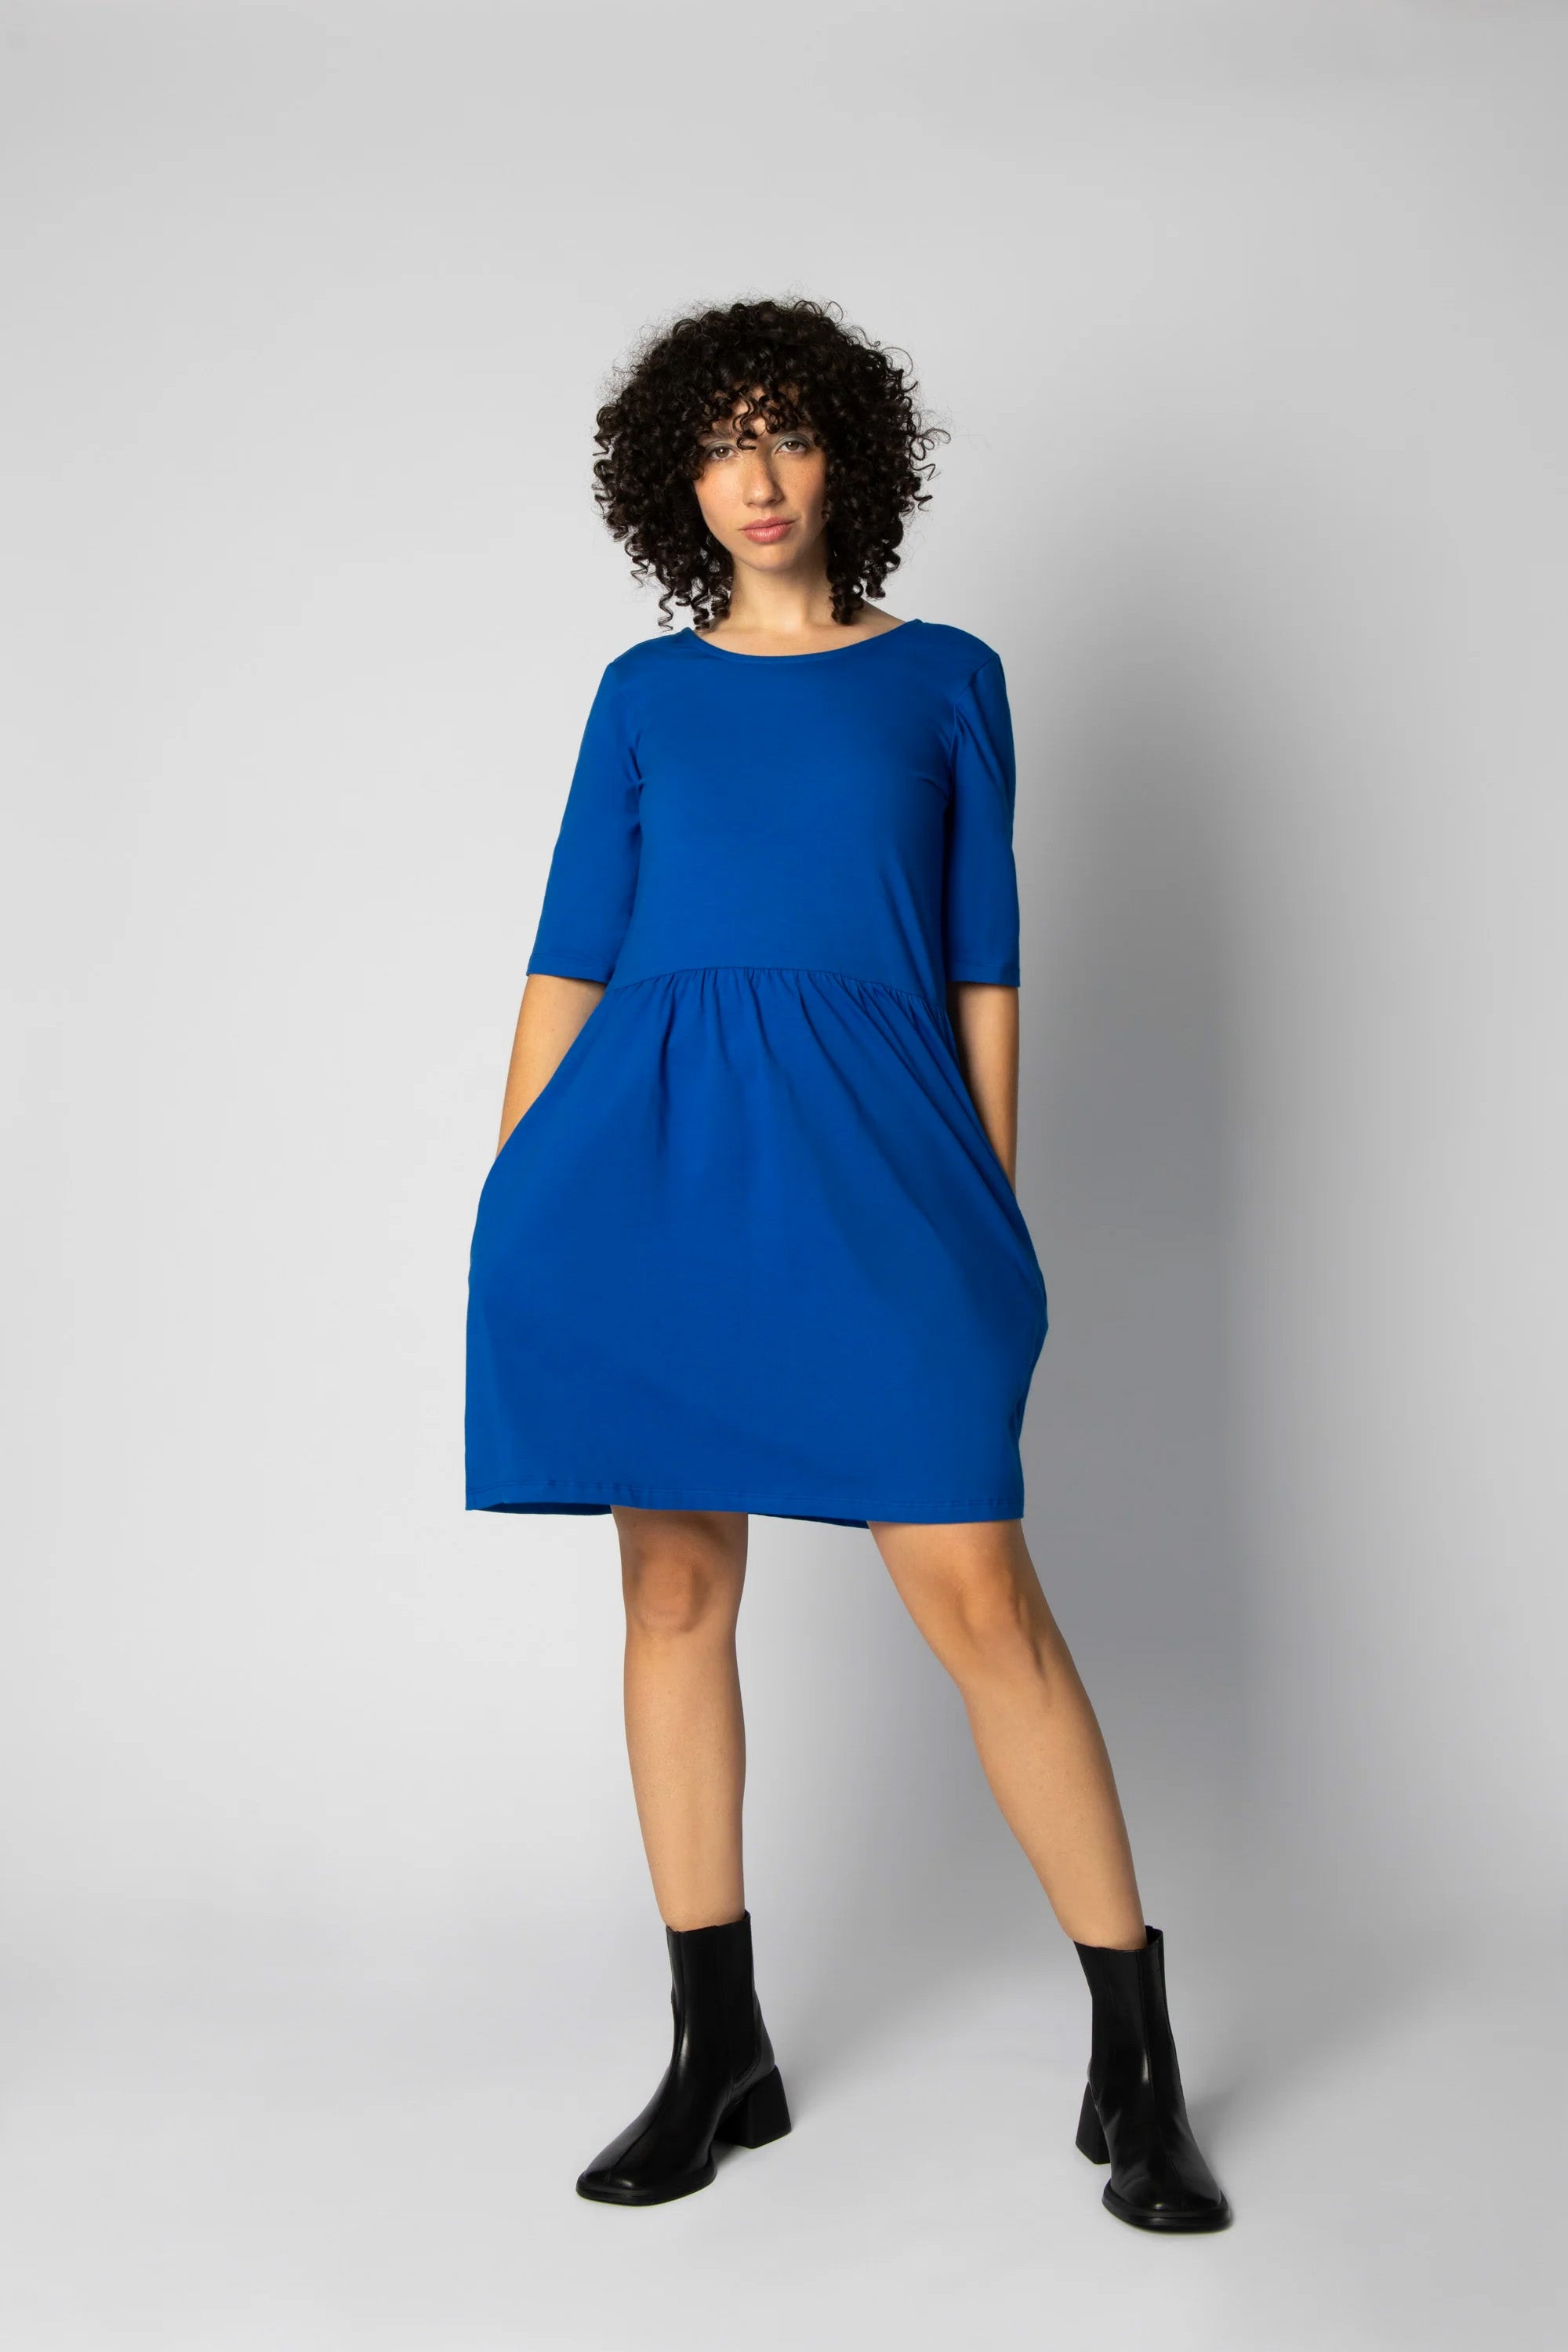 Lousse Dress by Eve Lavoie, Royal Cotton, OEKO-TEX certified cotton, eco-fabric, reversible, boat neck on one side, V-neck at the other, defined waist, full skirt, elbow-length sleeves, sizes XS to XL, made in Montreal 